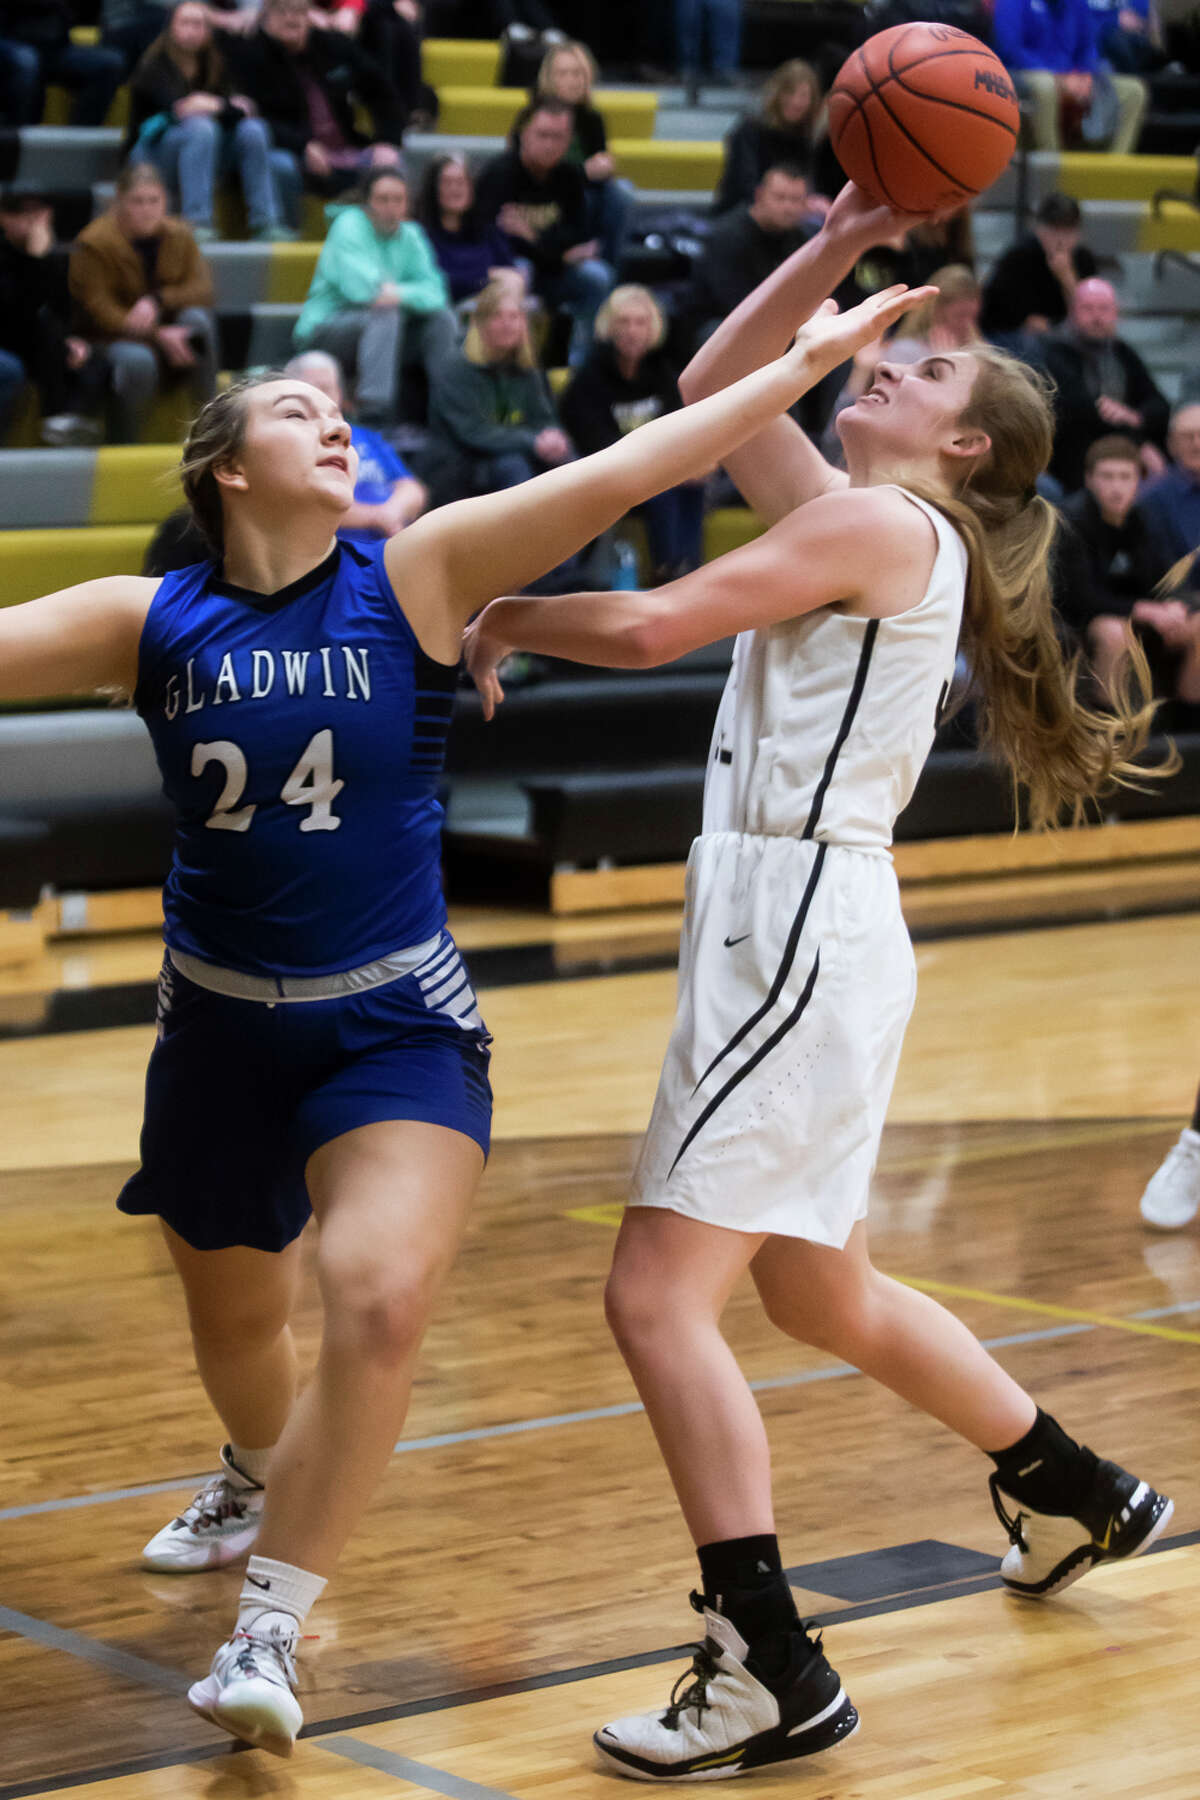 Gladwin's Delaney Reynolds and Bullock Creek's Daisy Schwartz fight for possession during their game Wednesday, Dec. 1, 2021 at Bullock Creek High School.